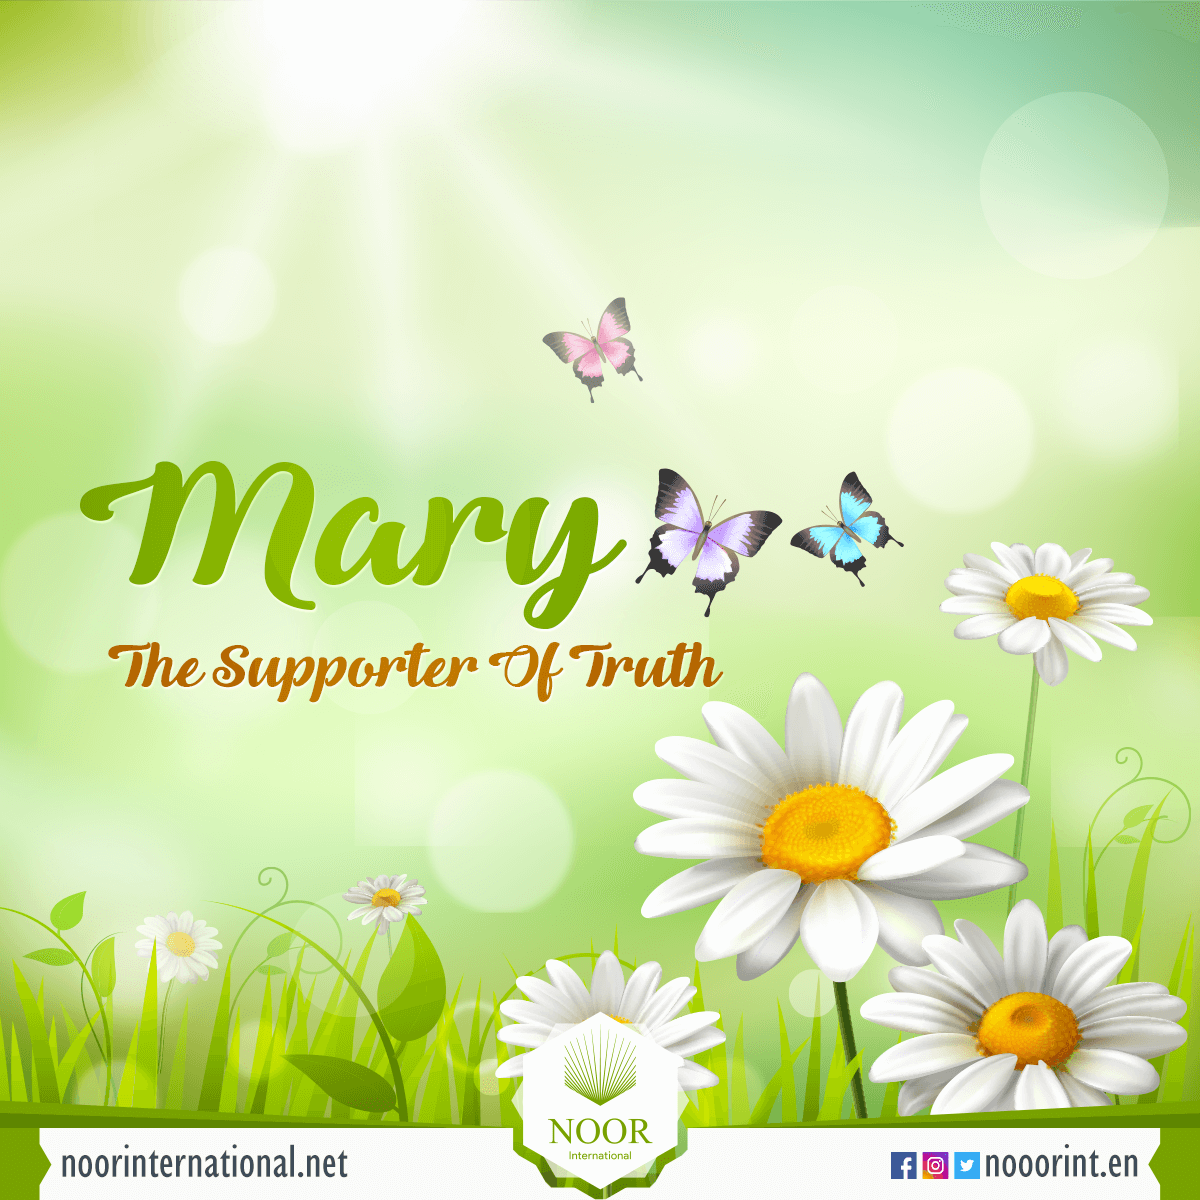 Mary the supporter of truth